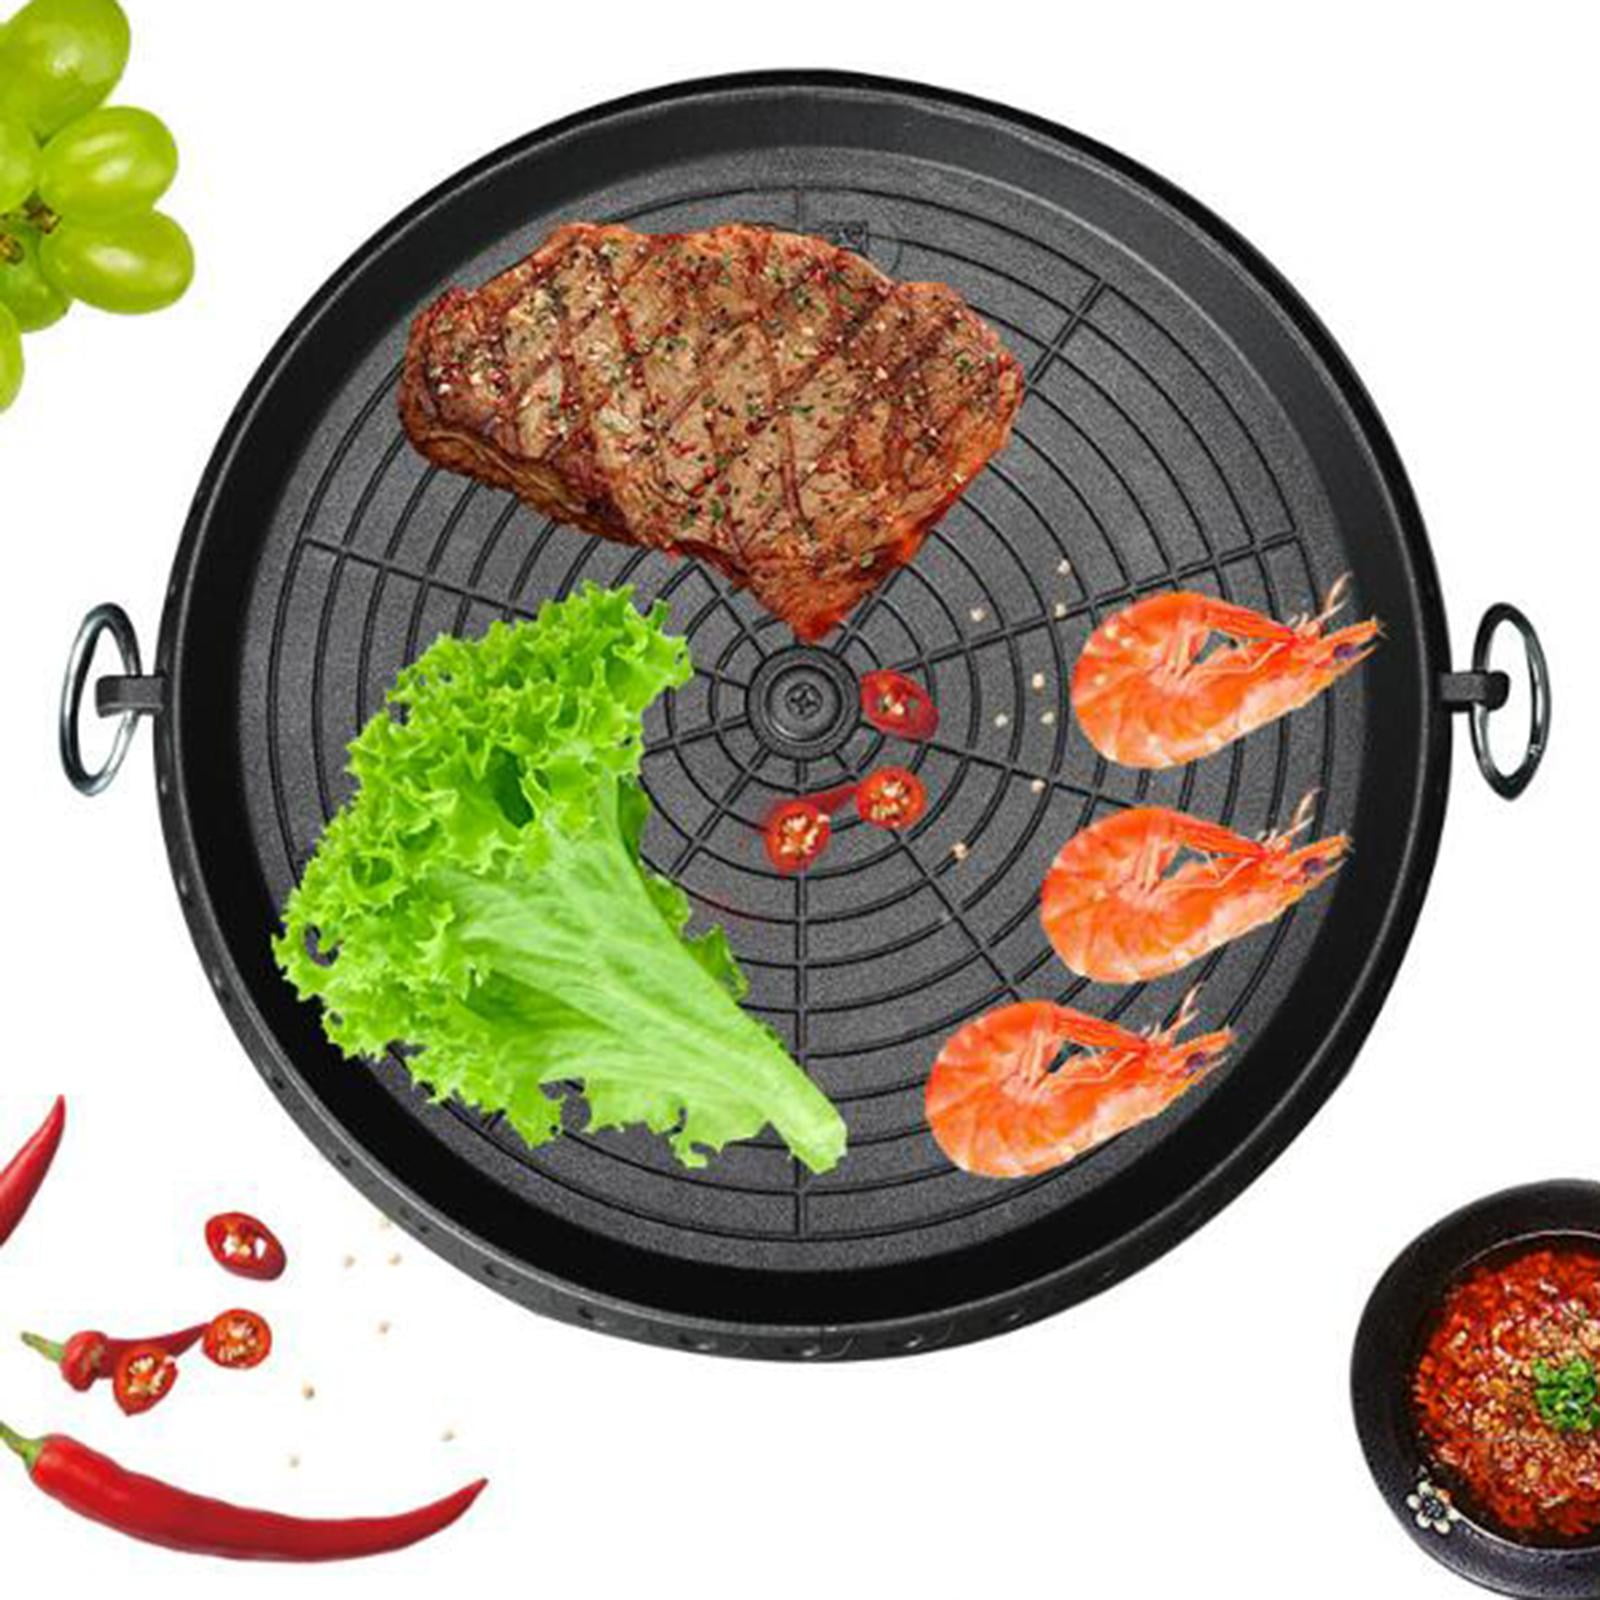 BBQ Grill Pan For Indoor And Outdoor Cooking On Universal Induction Cookers